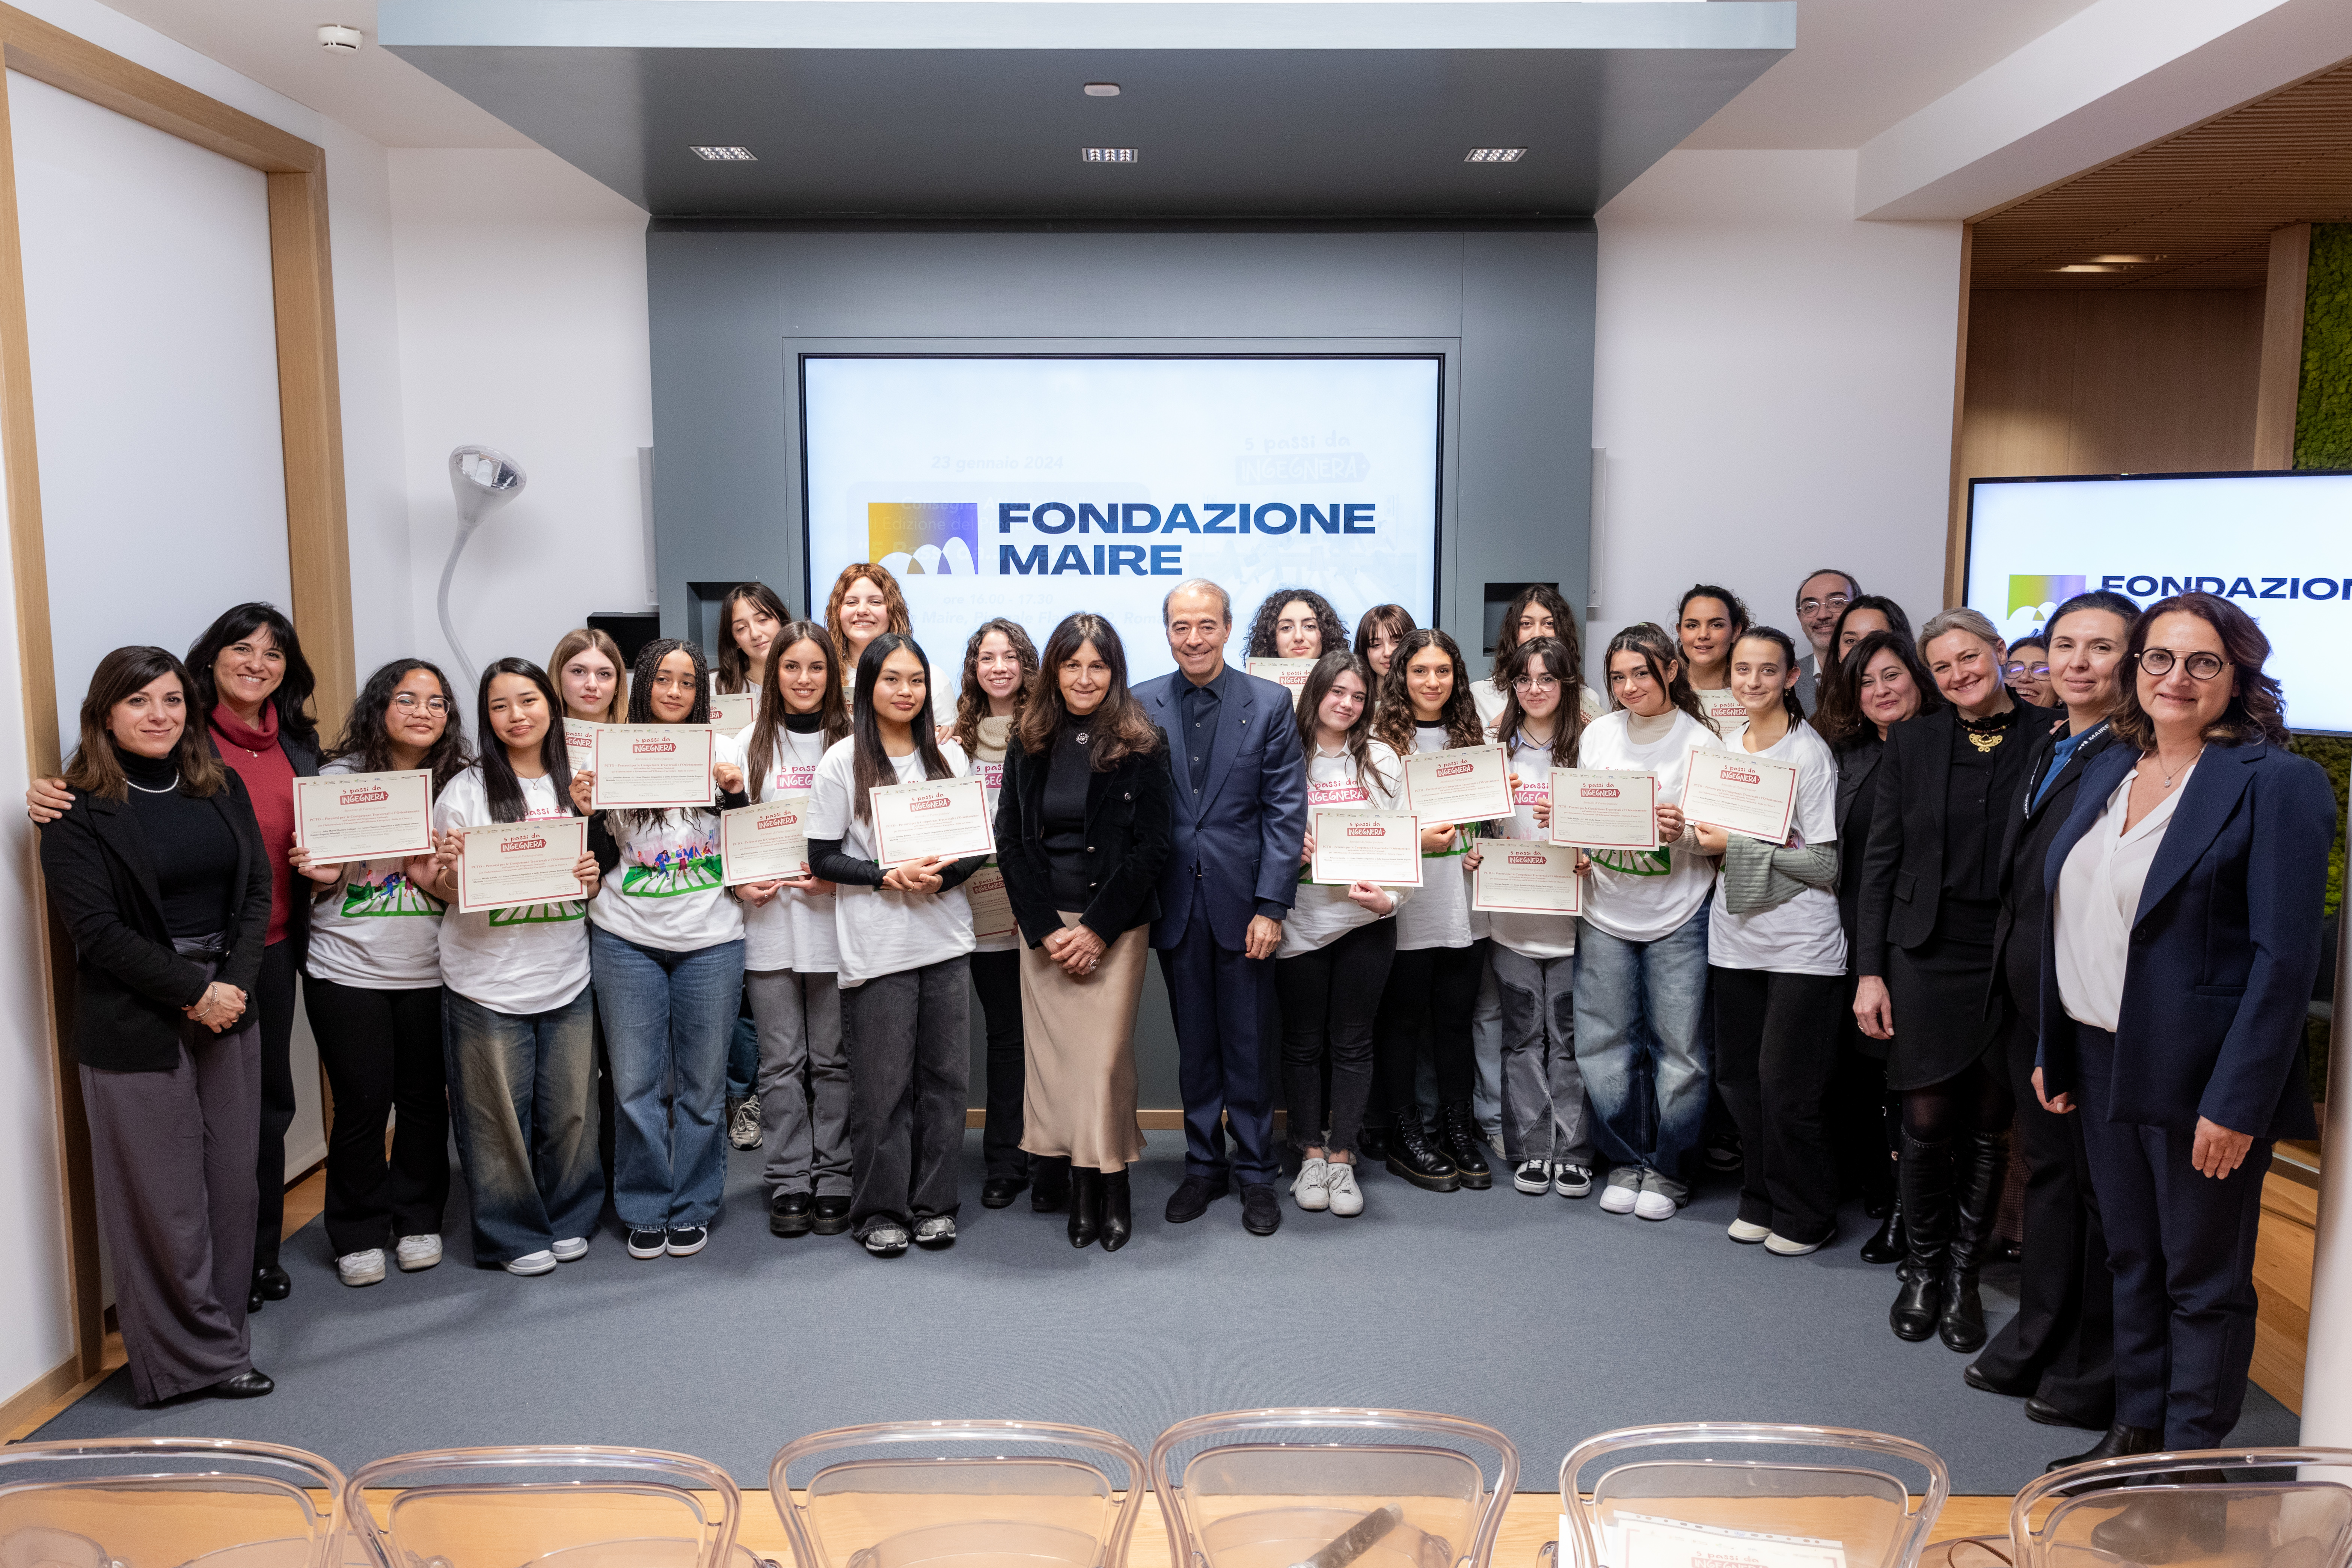 Fondazione MAIRE  and ENEA conclude second edition of 80-hour energy transition training "5 Steps to Engineering"